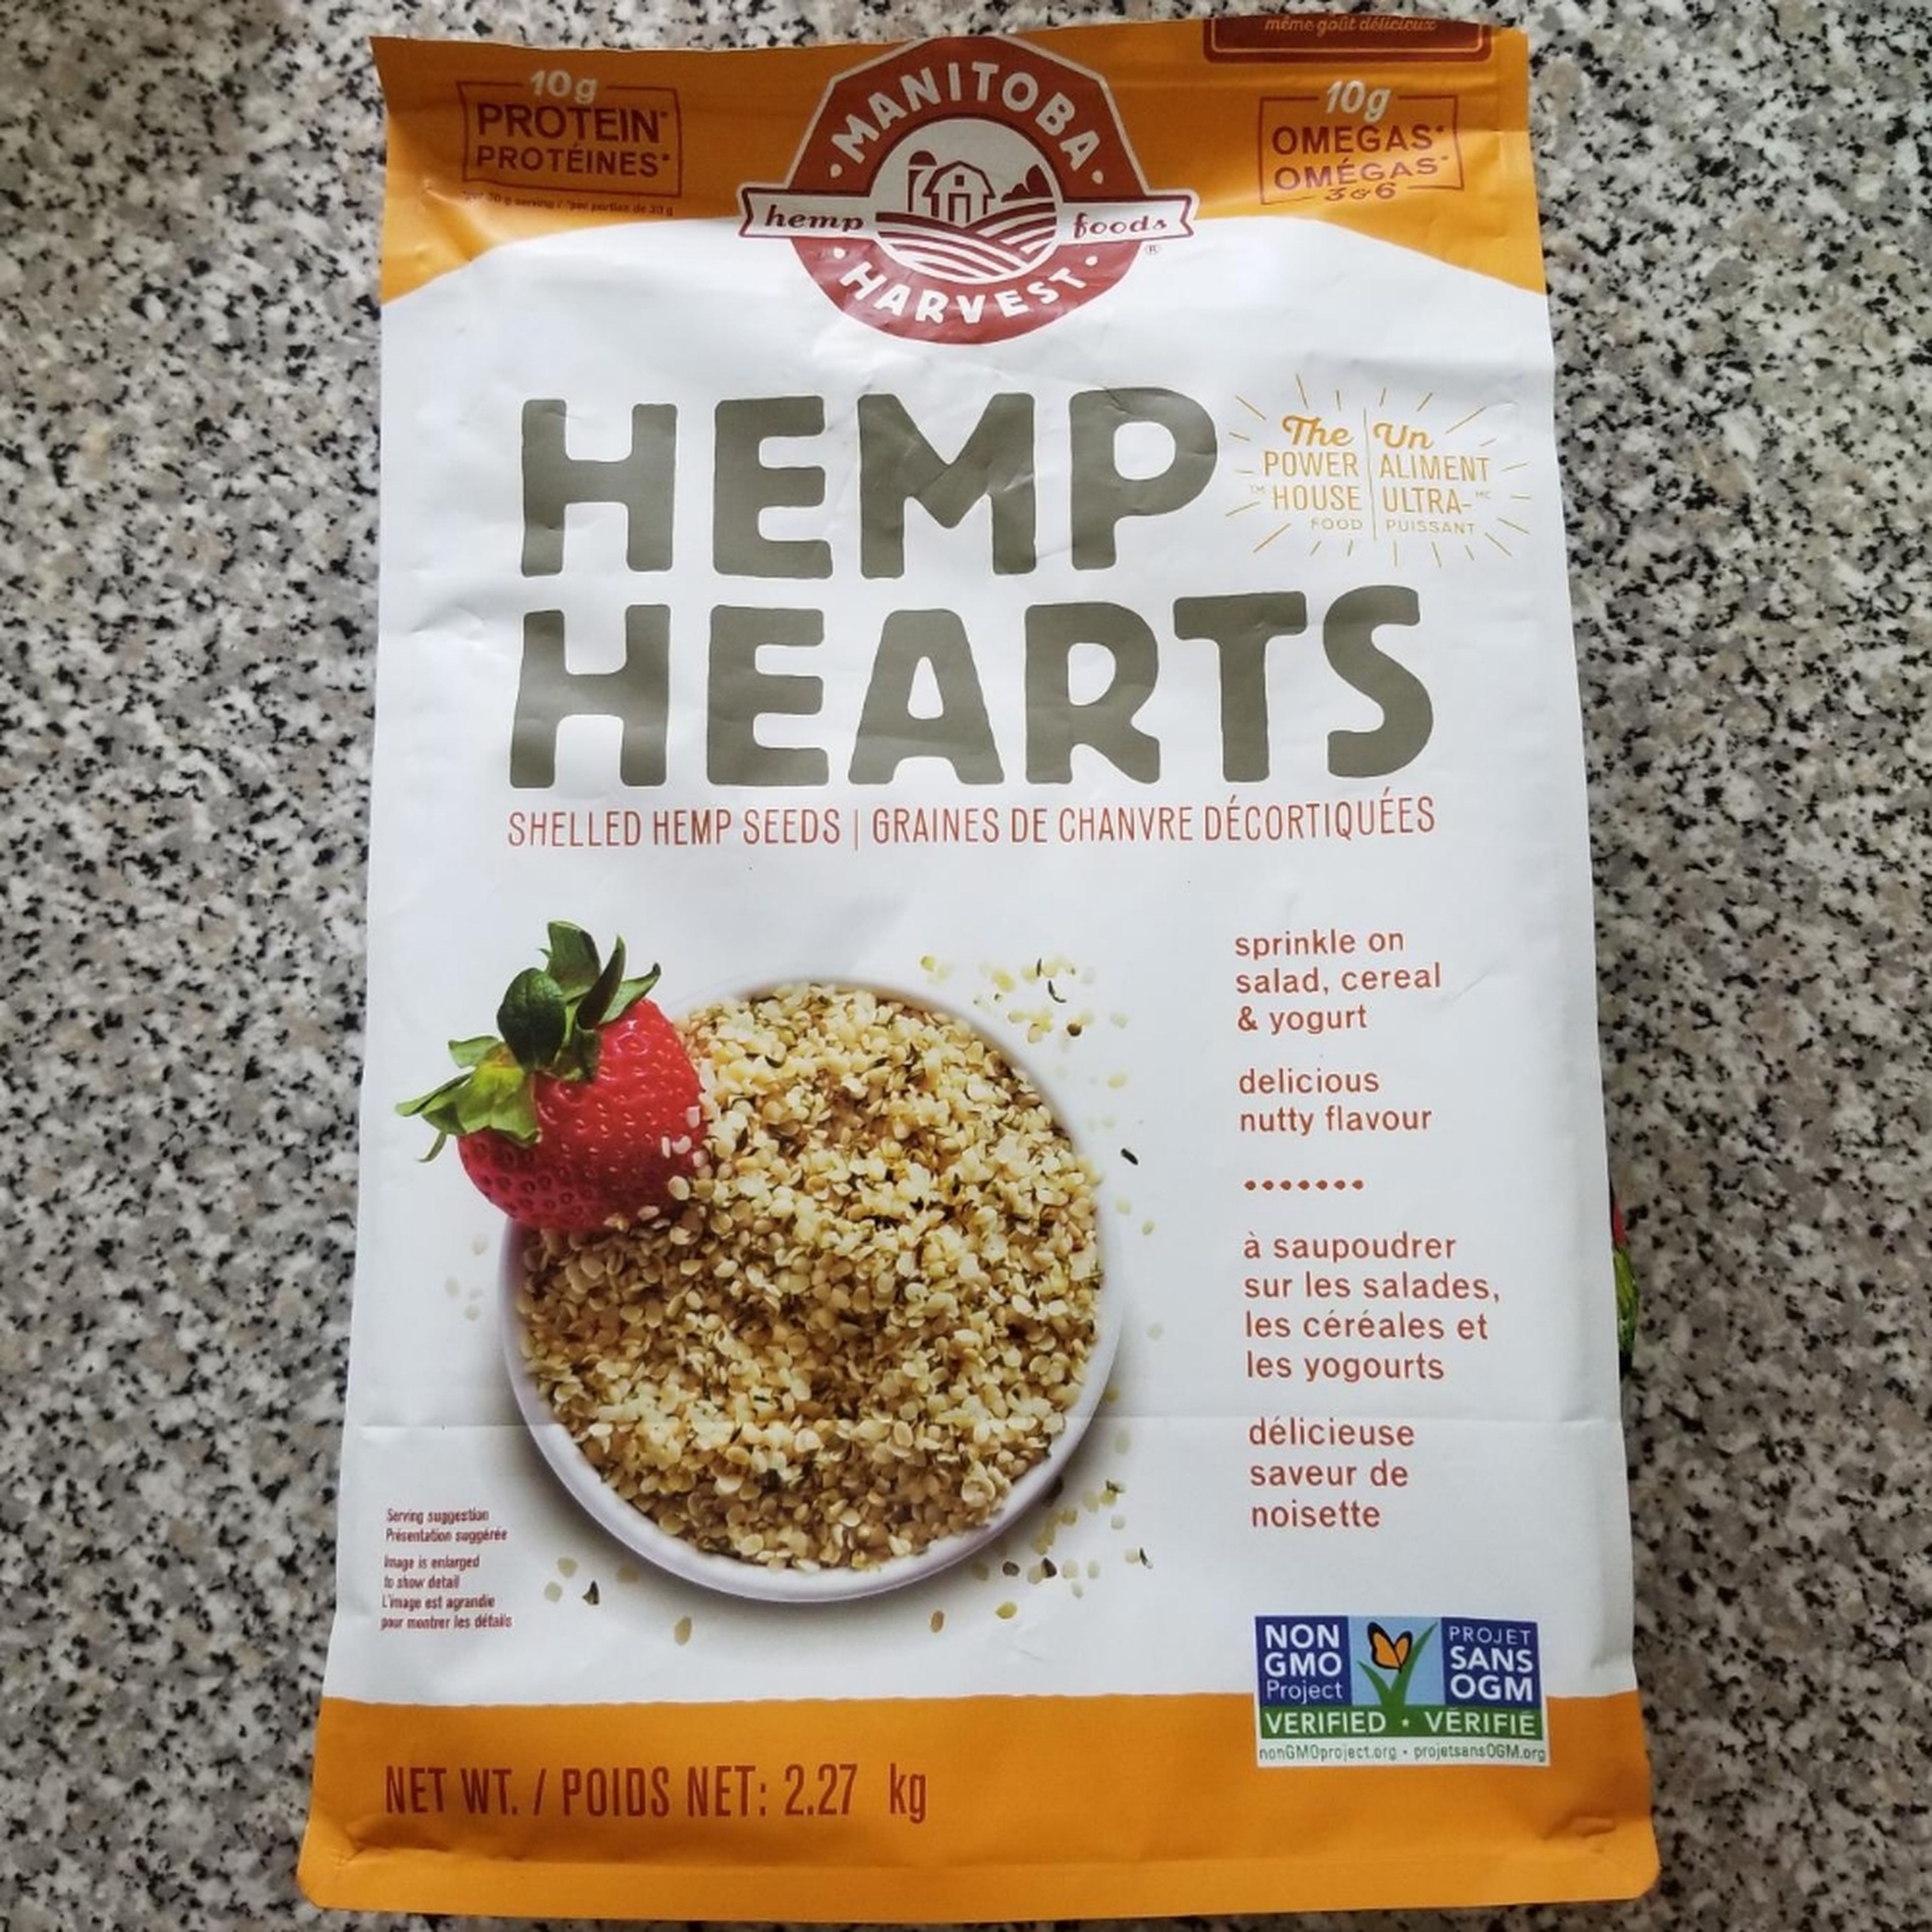 Add 150g hemp hearts to mixing bowl. I generally get the large 2.27 kg bag from Whole Foods when it goes on sale (they have an organic version that costs a bit more). Regular version also available at Costco.